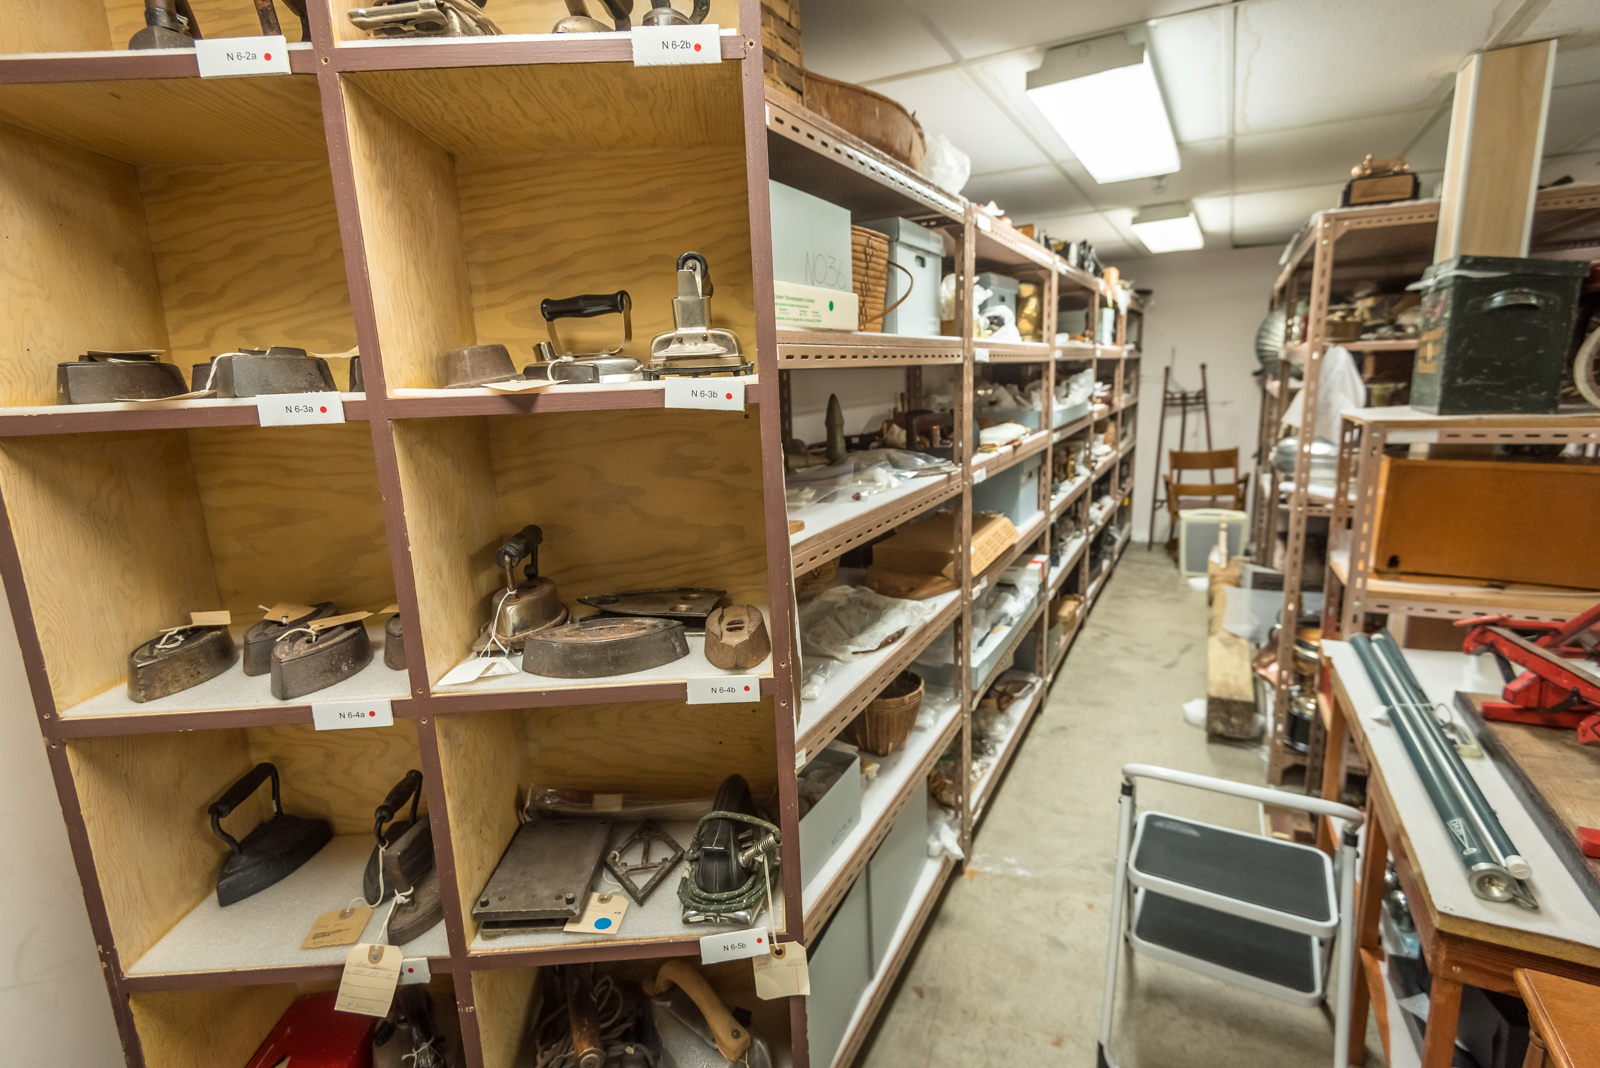 A glimpse of the stacks located in the basement of the museum